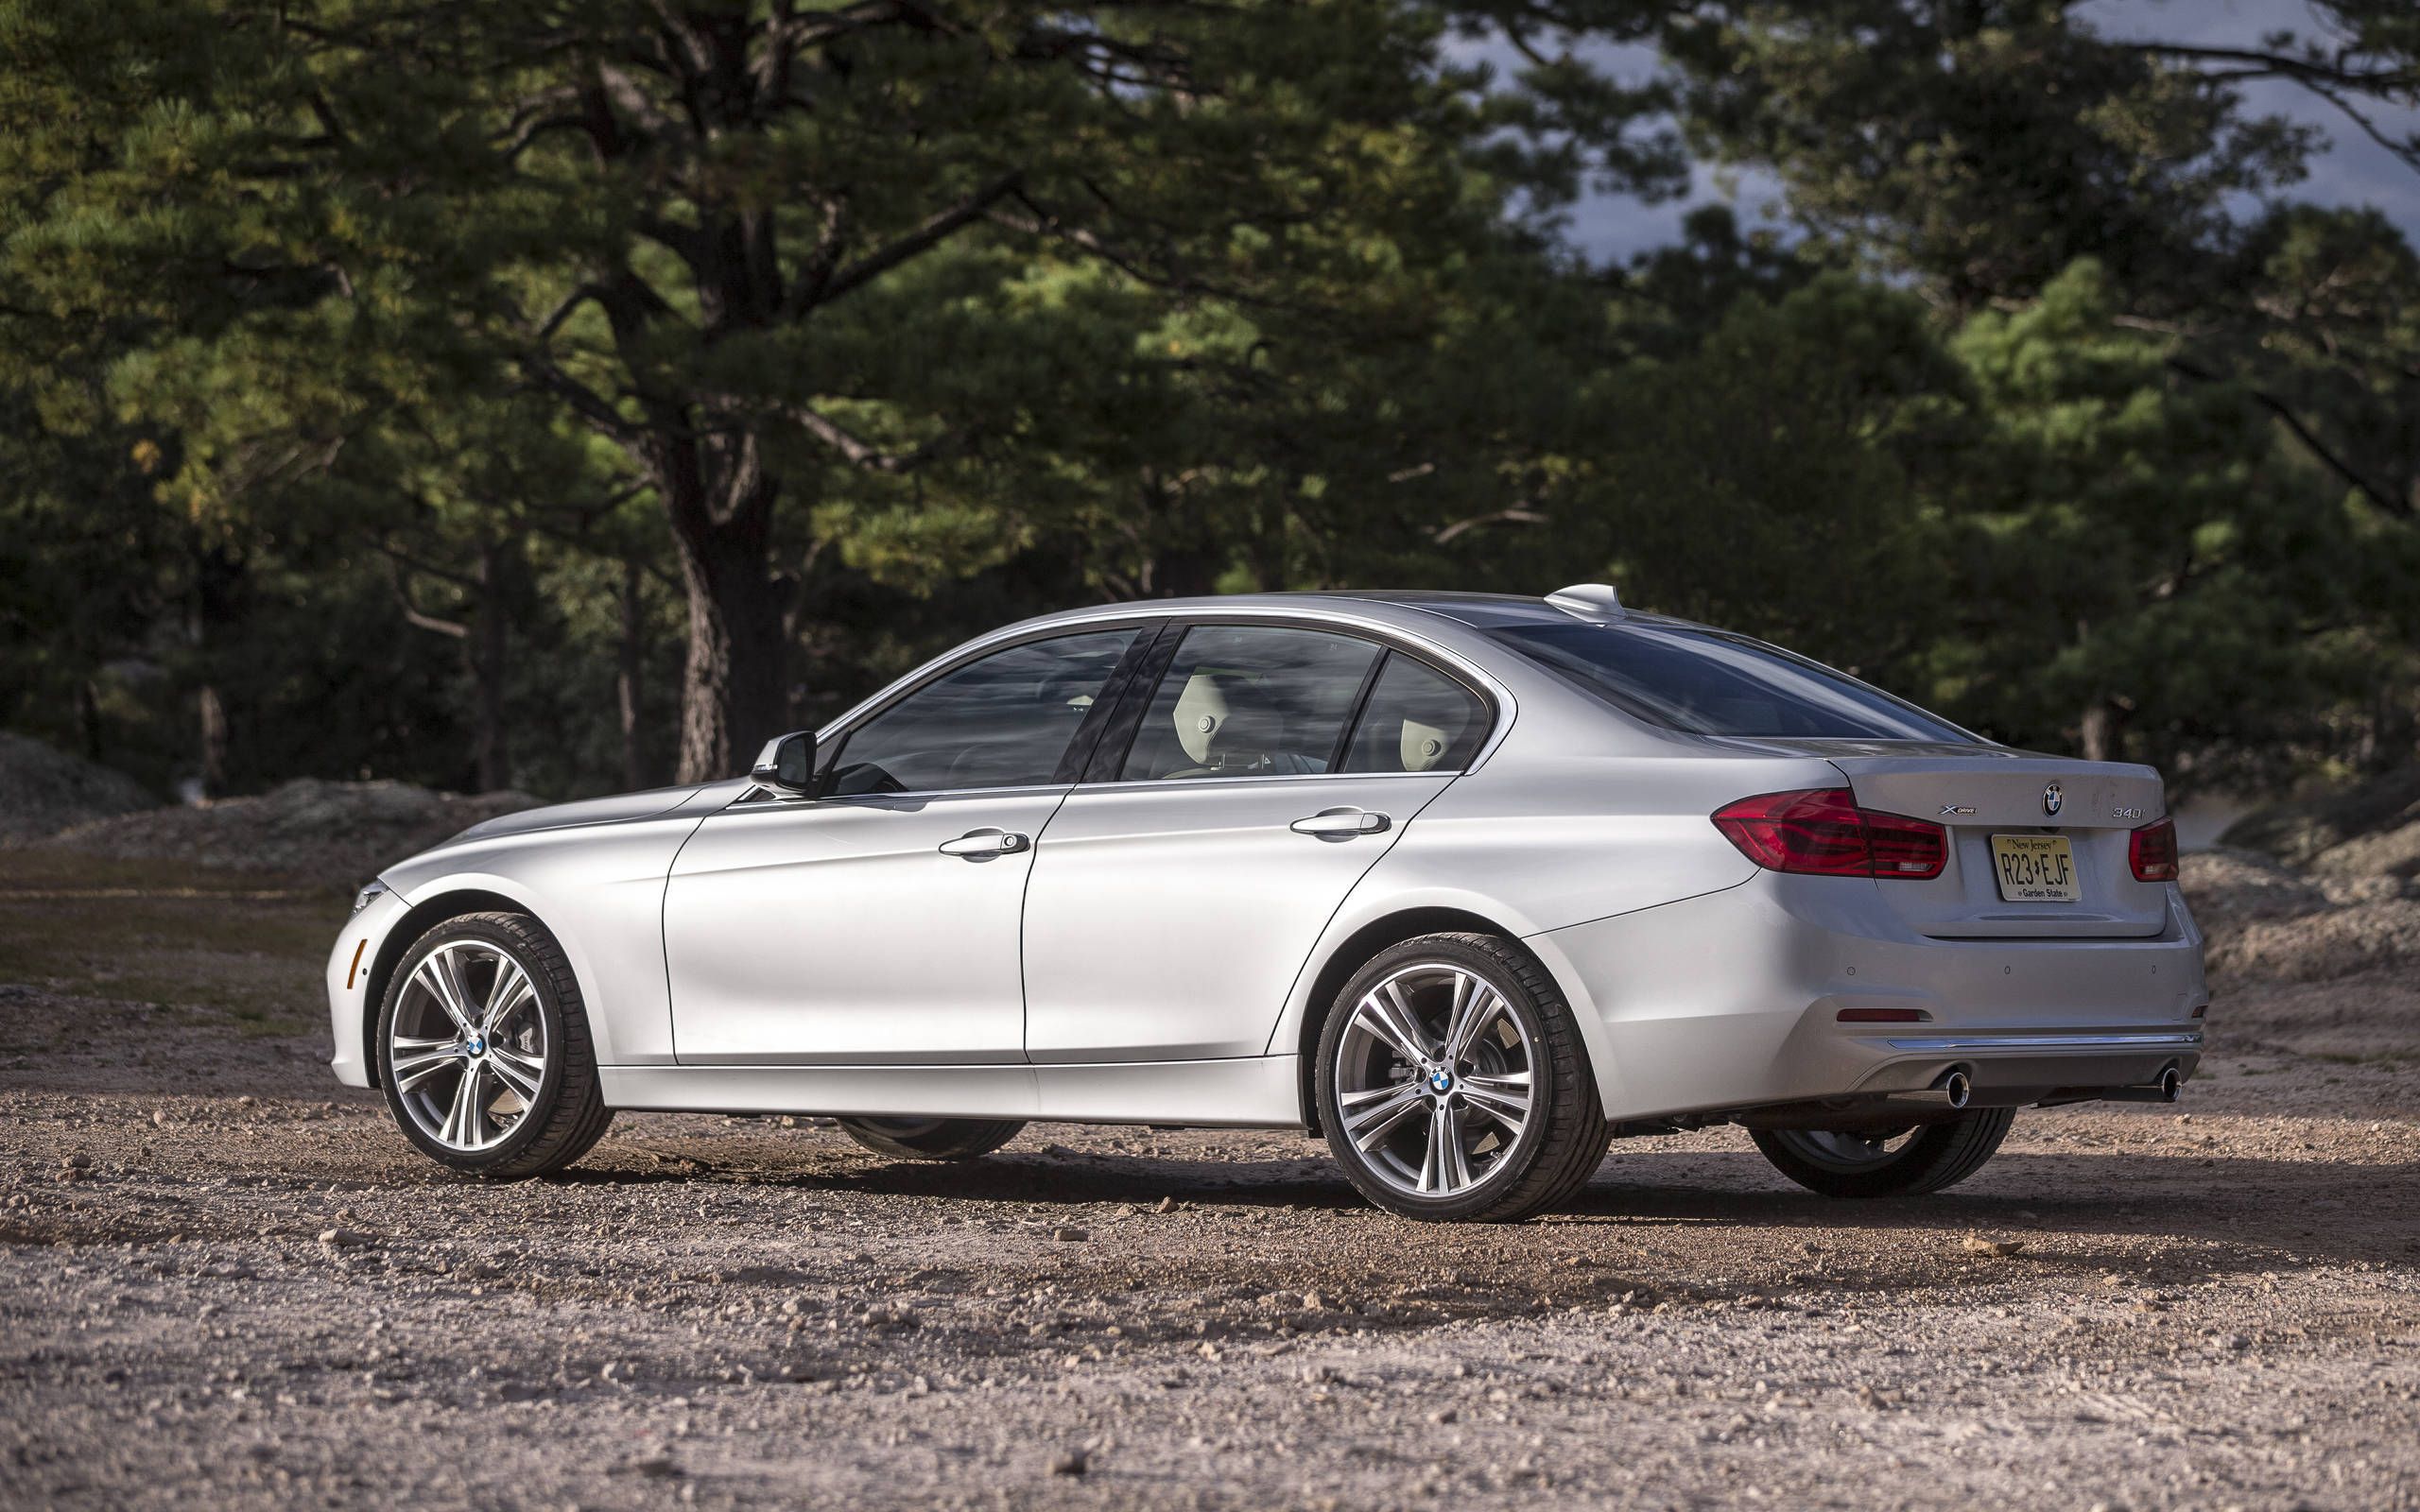 2016 BMW 340i review notes: Back in the saddle